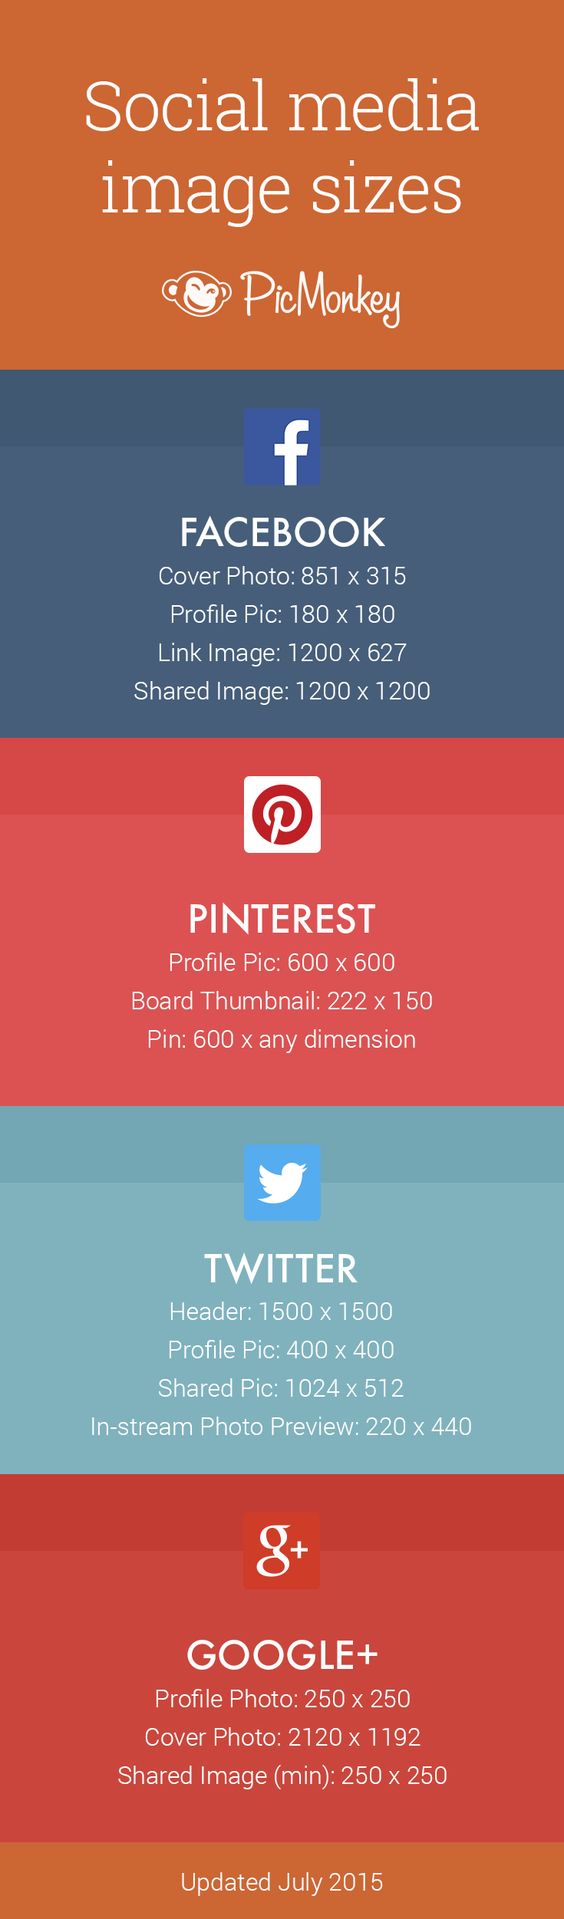 A nifty social media image size cheat sheet for quick and easy reference when creating your social images.